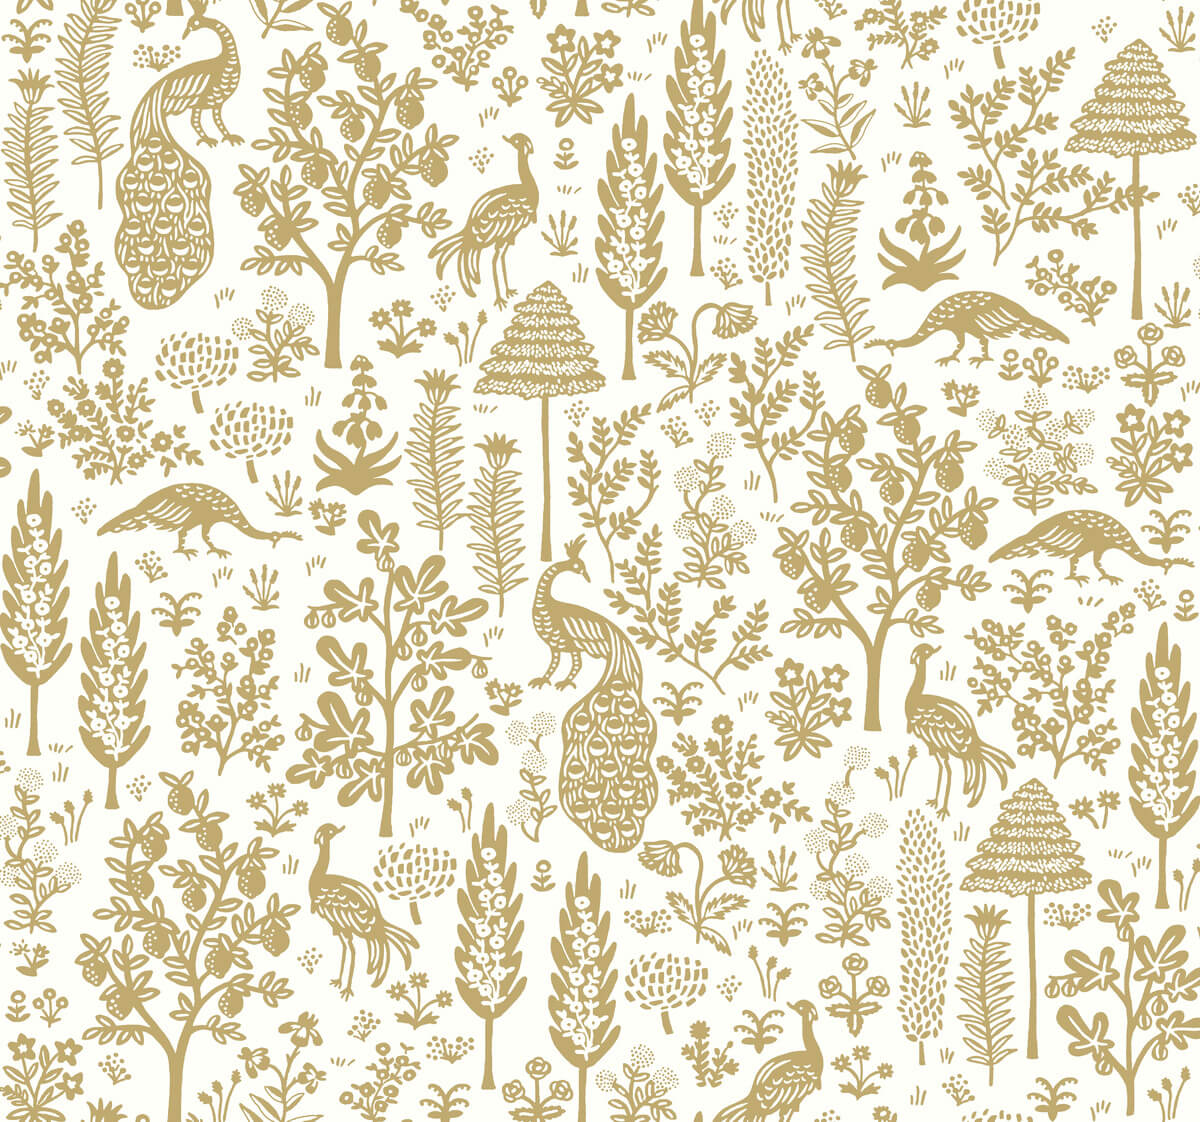 Rifle Paper Co. Second Edition Menagerie Toile Wallpaper - SAMPLE